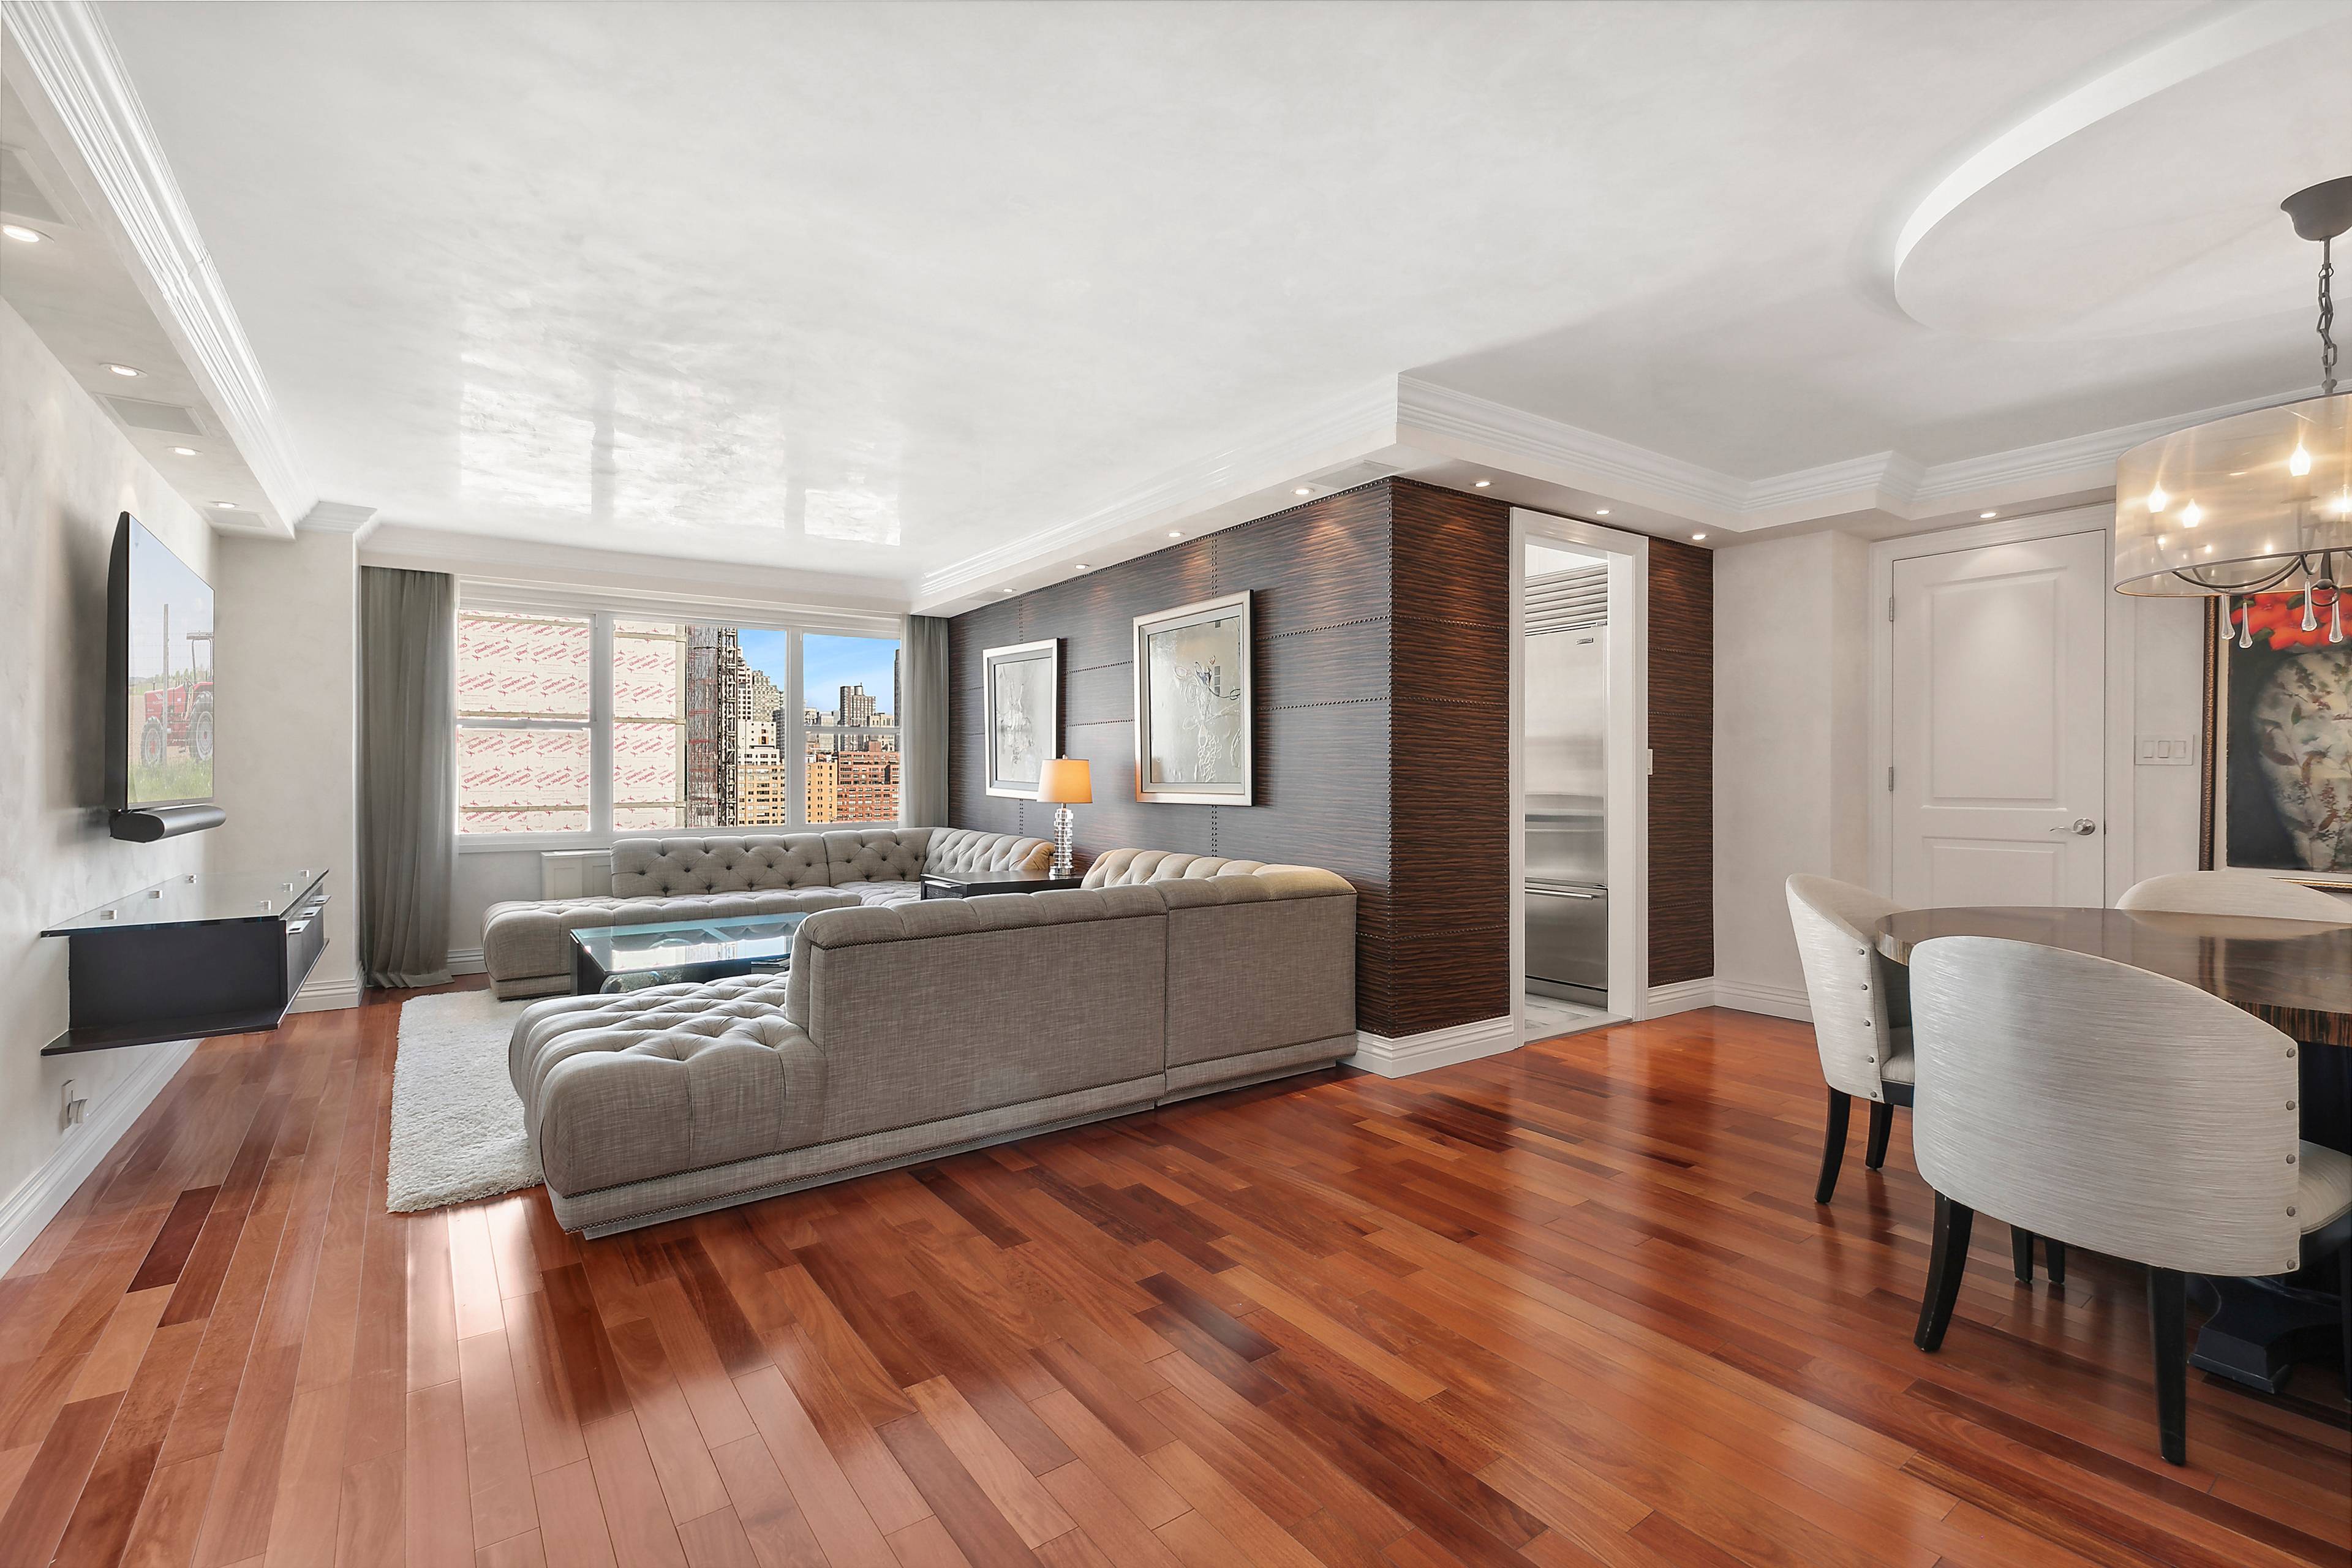 Indulge in the impeccable charm of this meticulously remodeled 2 bedroom, 2 bathroom Co op located on the coveted 74th and Third Avenue.